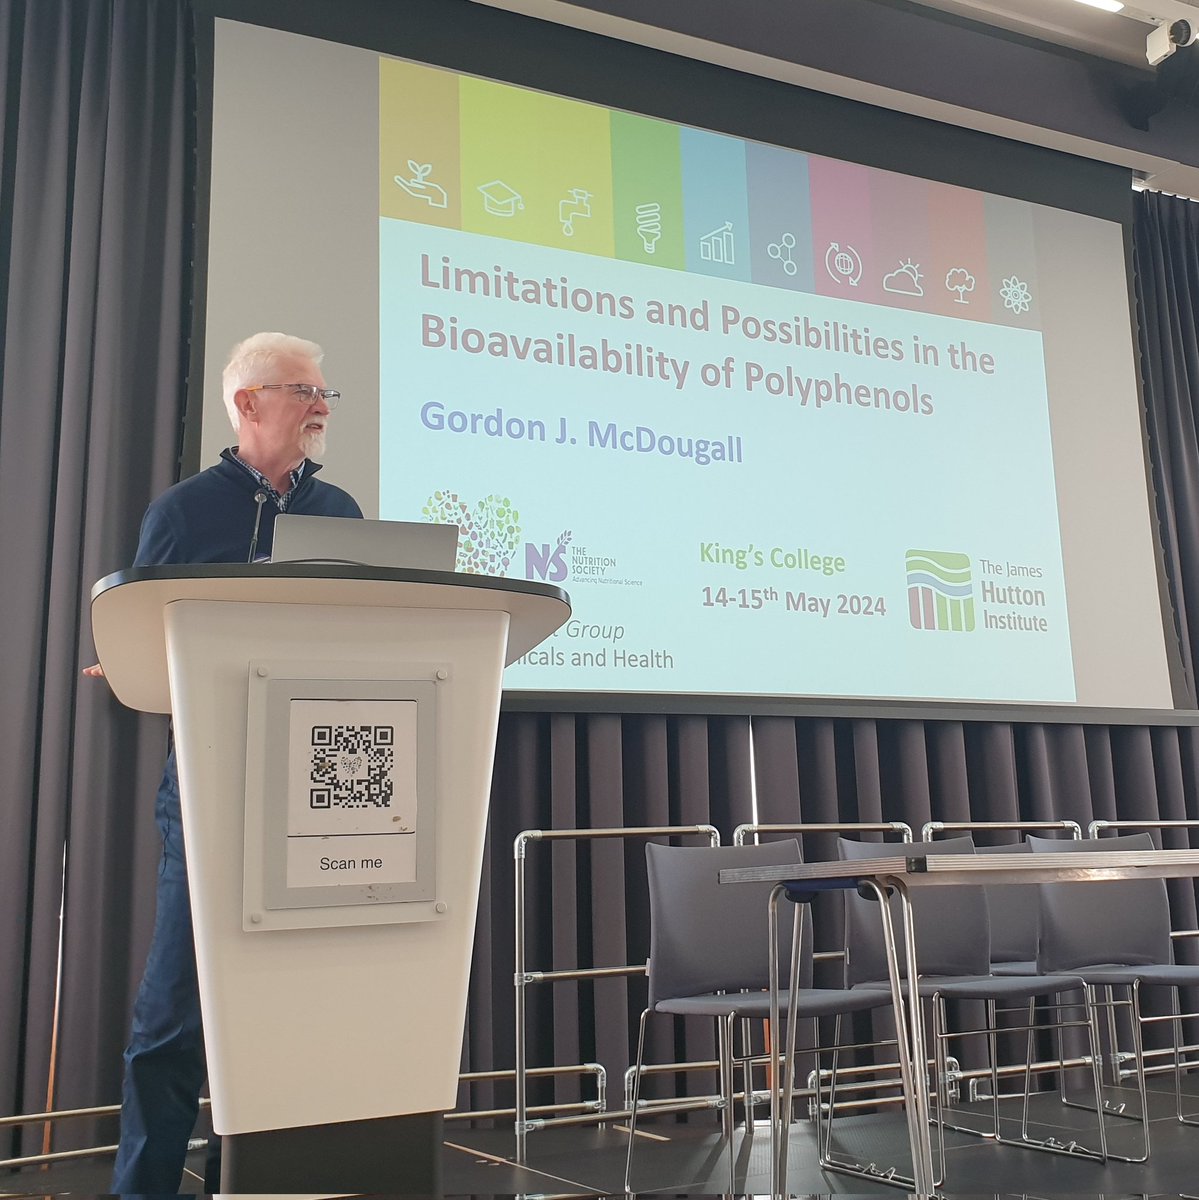 #phytochemicals and health SIG day 2! @JamesHuttonInst Gordon McDougall kicks off the bioavailability session with a berry focus 🍓

always great to see @SCAF_ARC members at the meeting! 🏴󠁧󠁢󠁳󠁣󠁴󠁿